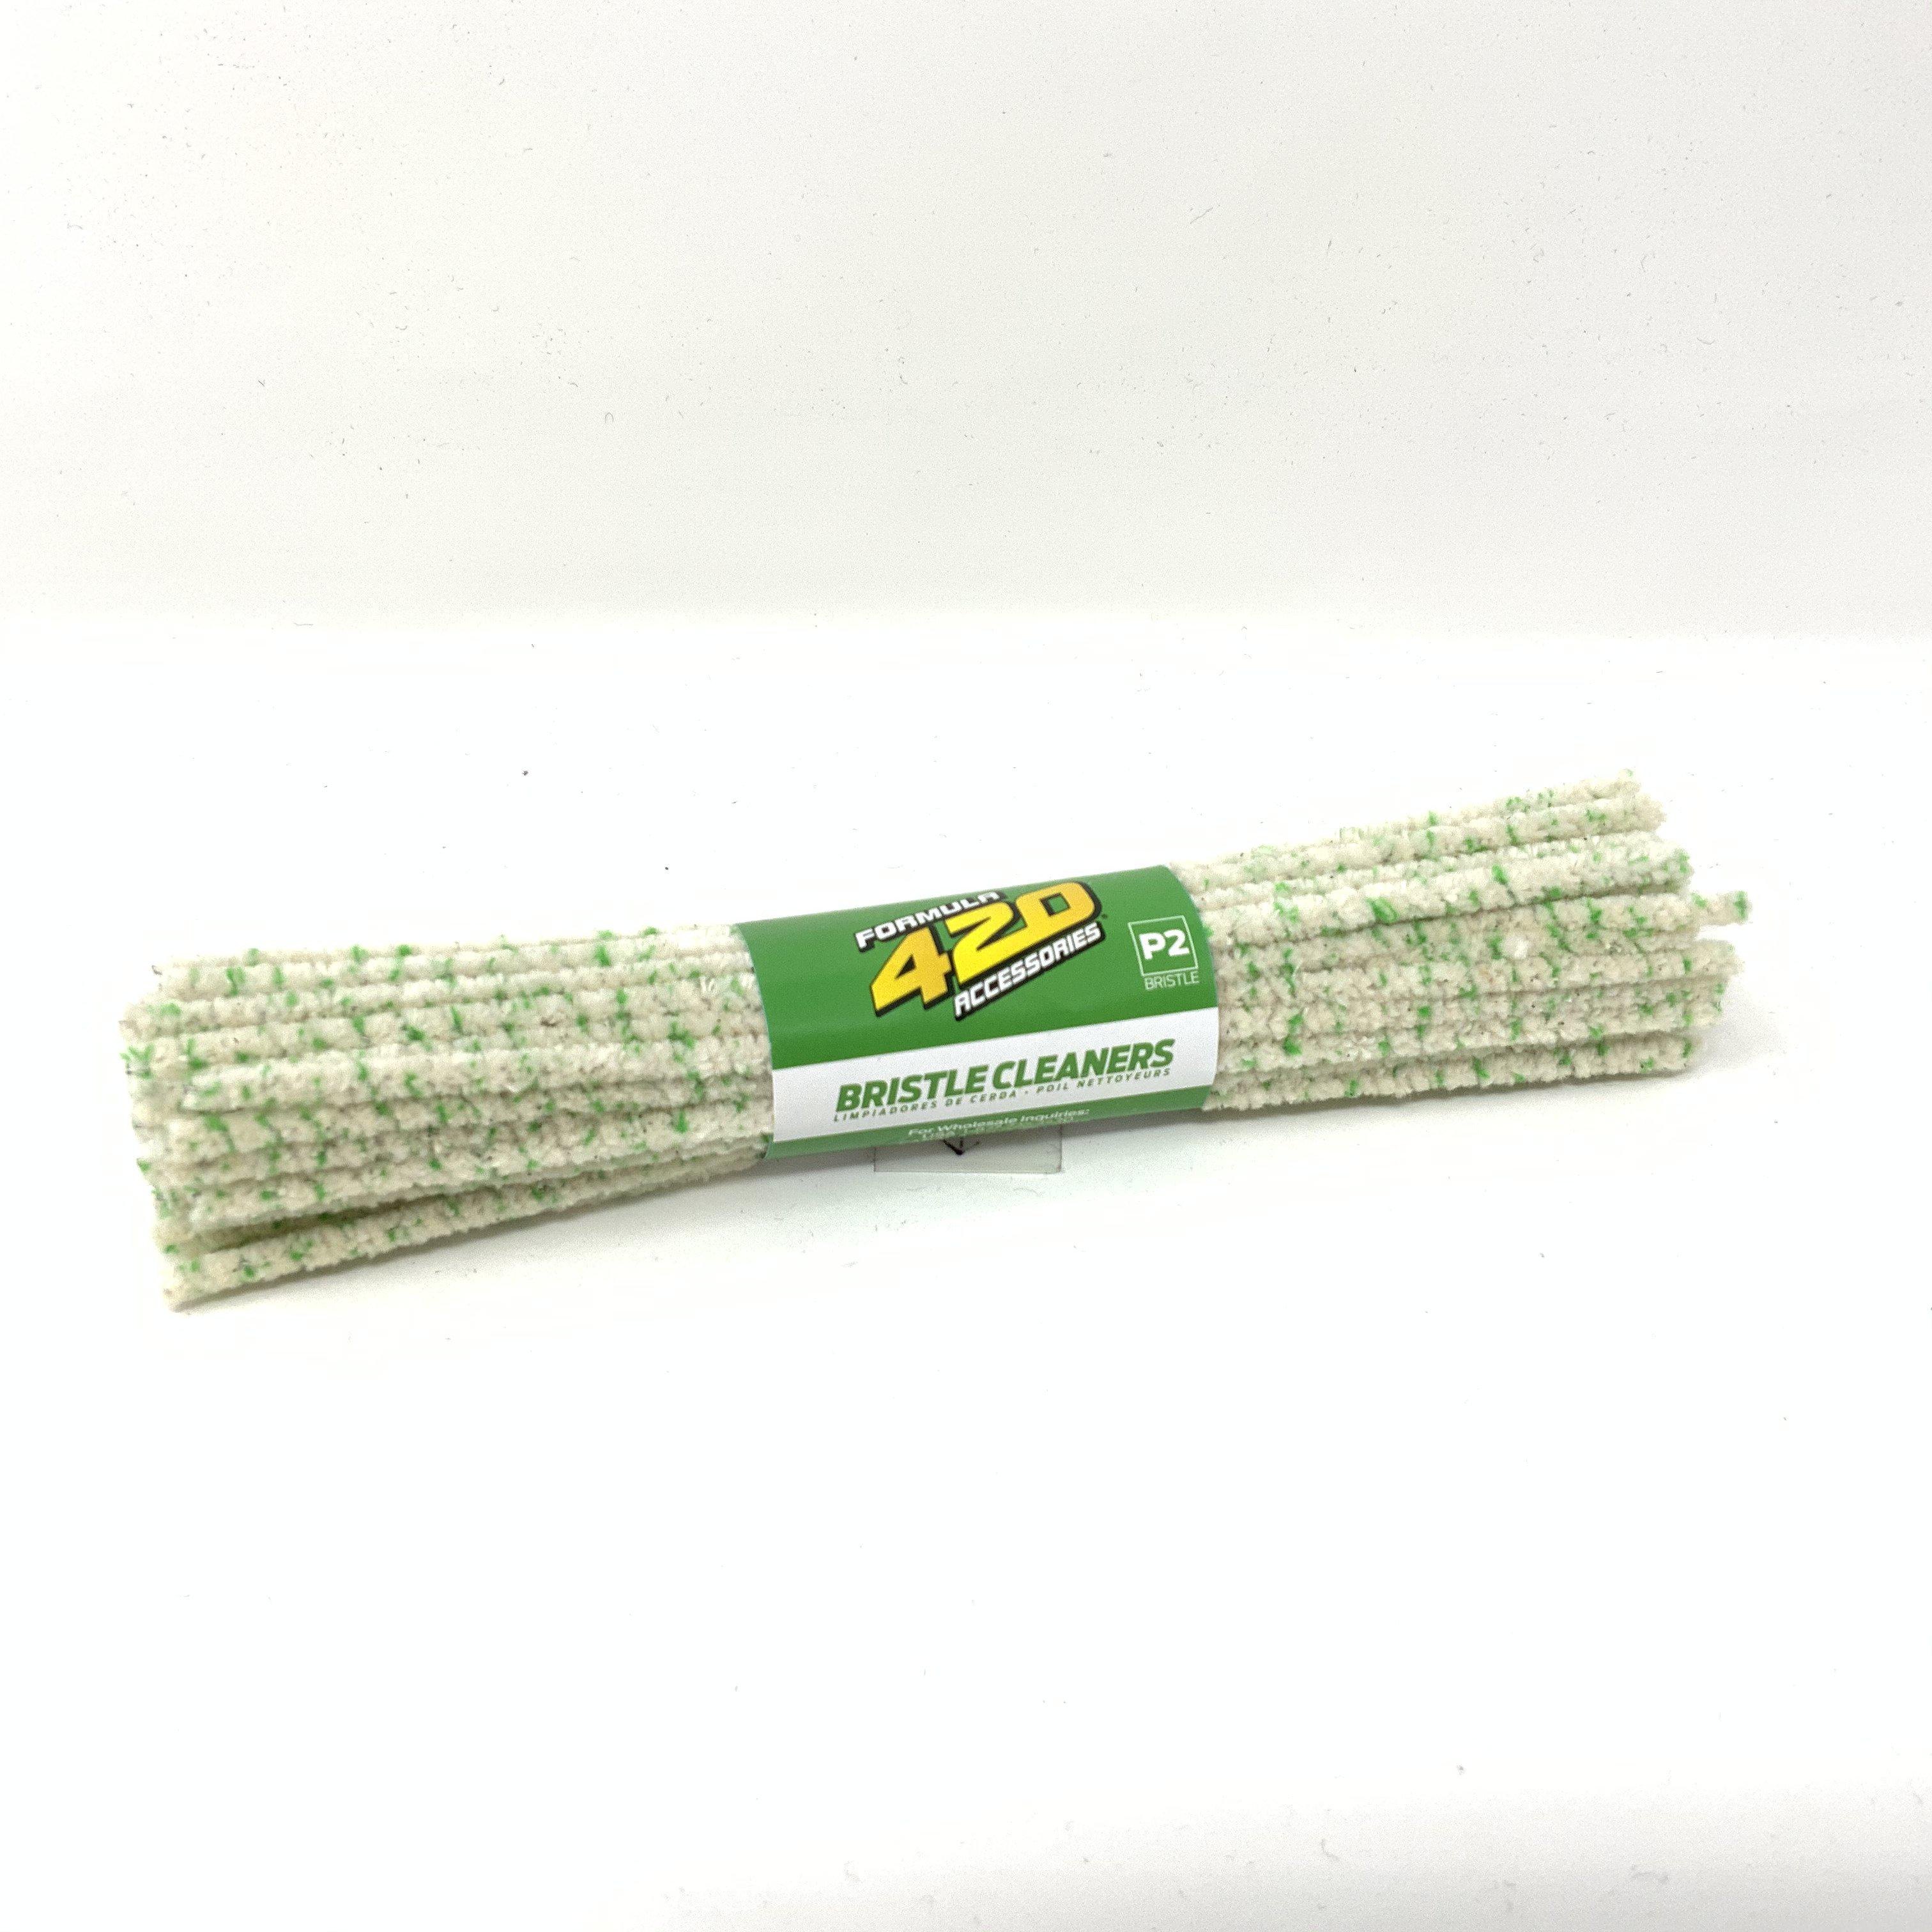 Pipe Cleaners - The Best Way to Keep Your Pipes Clean - MUXIANG Pipe Shop